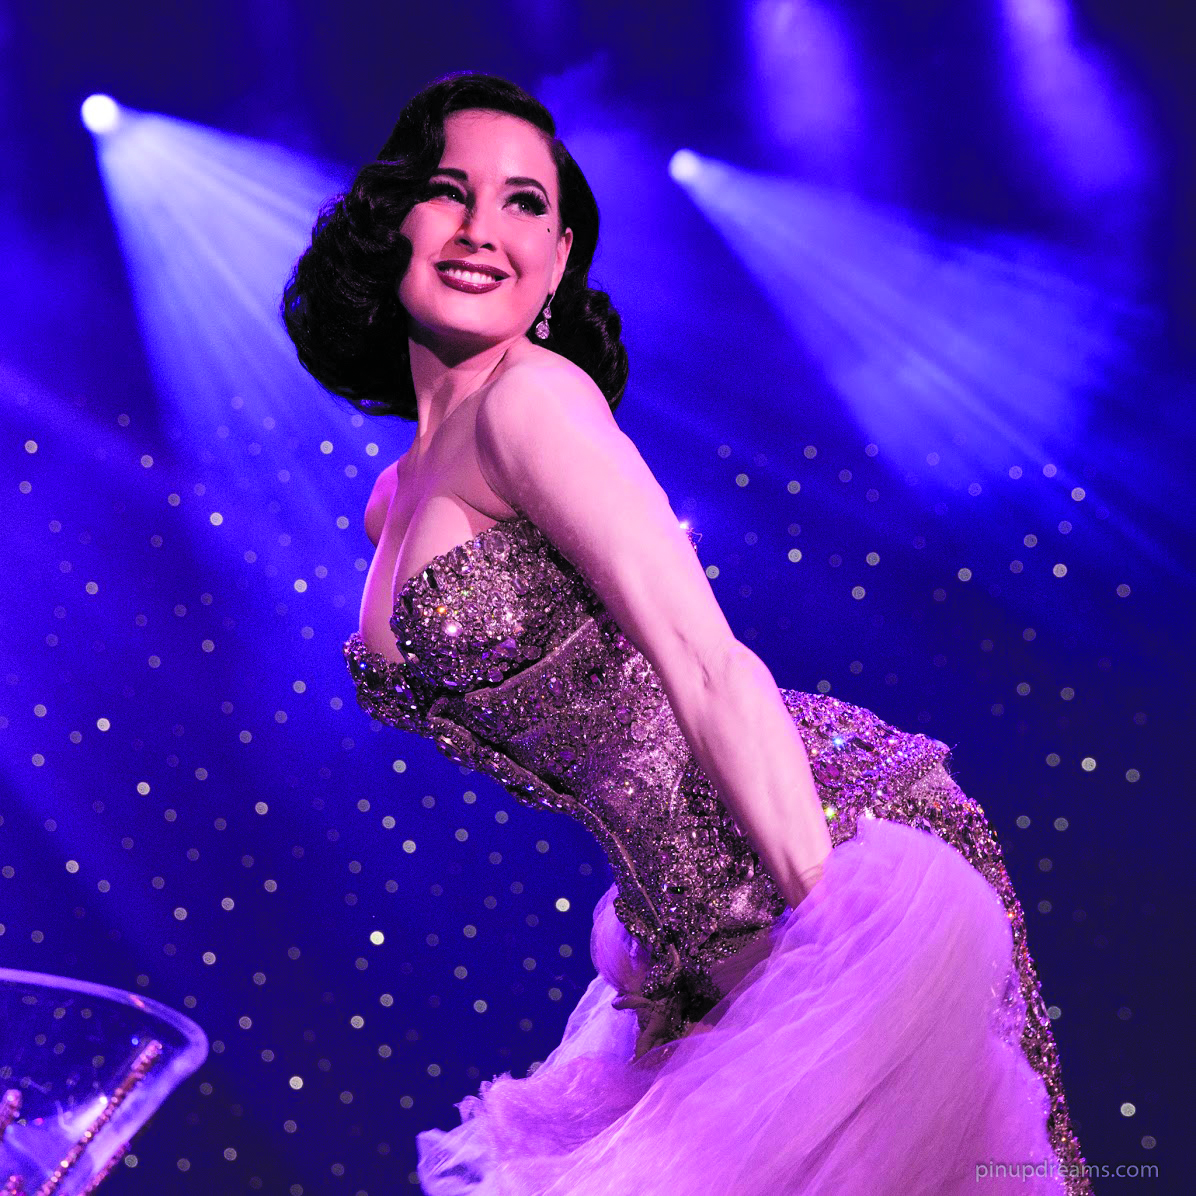 Dita Von Teese: Working with Taylor Swift Is 'Best Experience